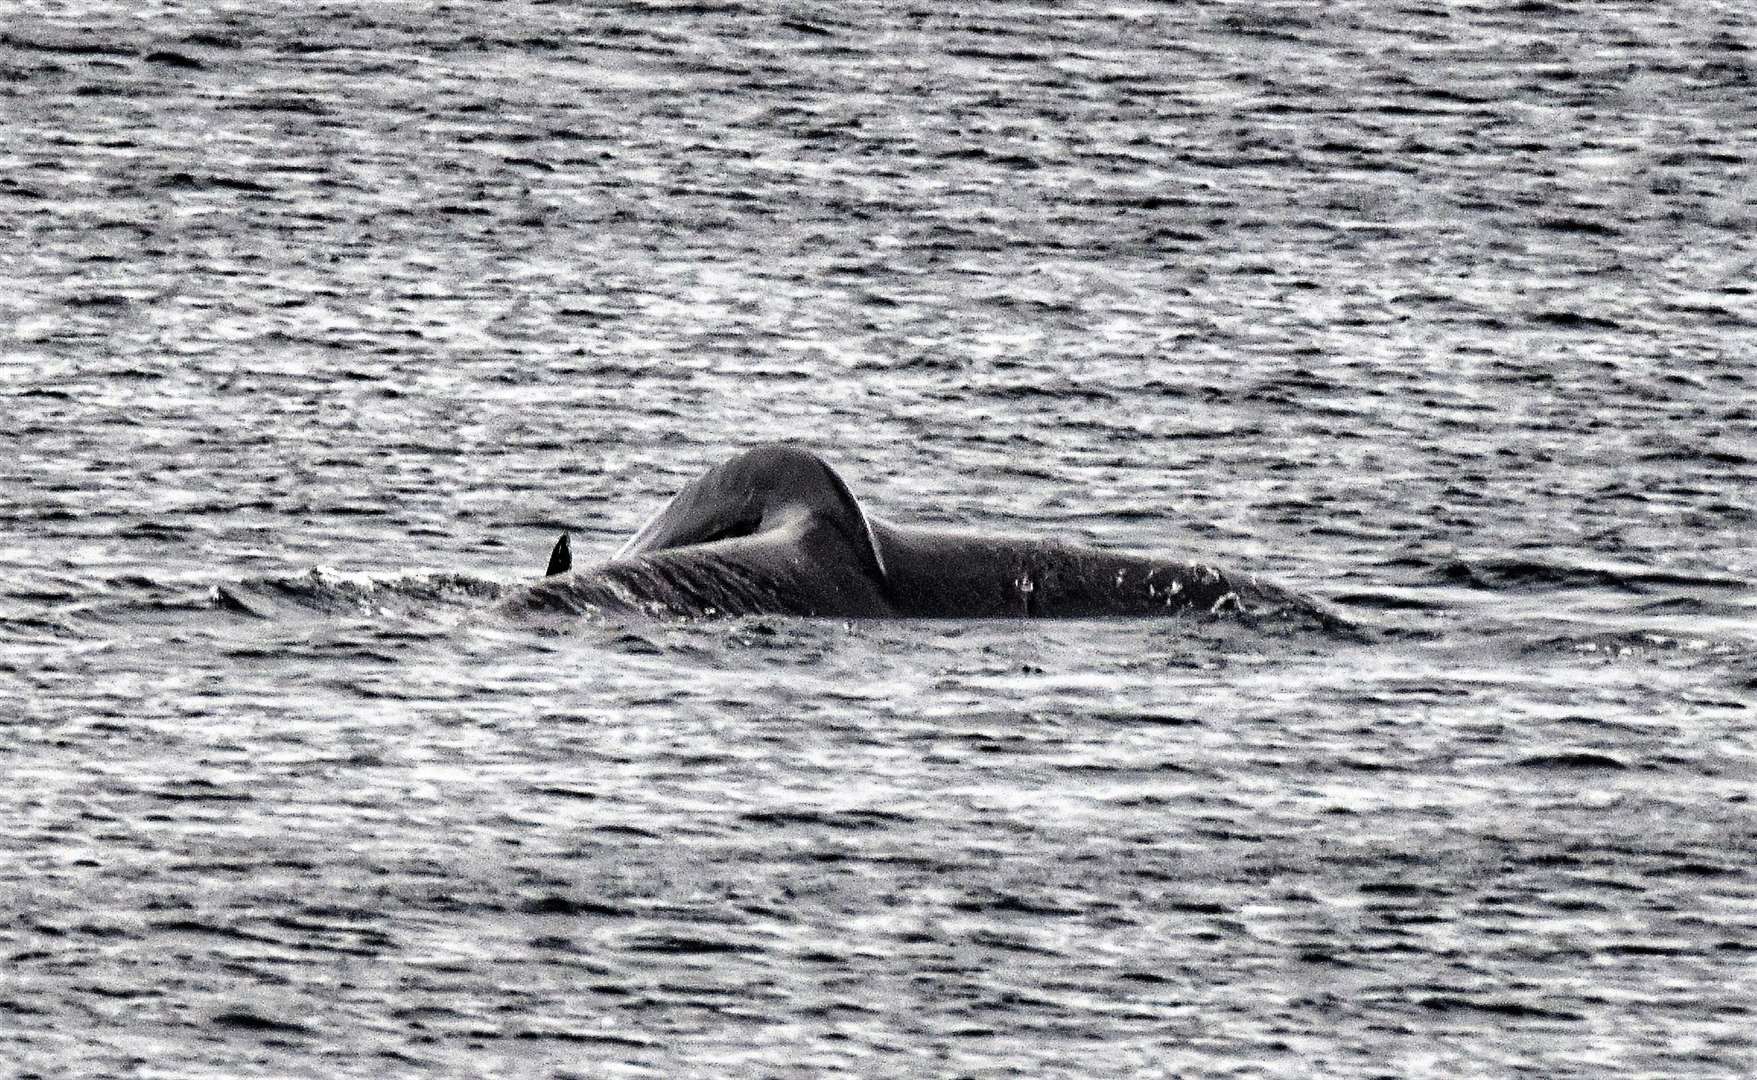 Humpback whale seen at Achastle shore on Wednesday evening. Picture: Andy Knight